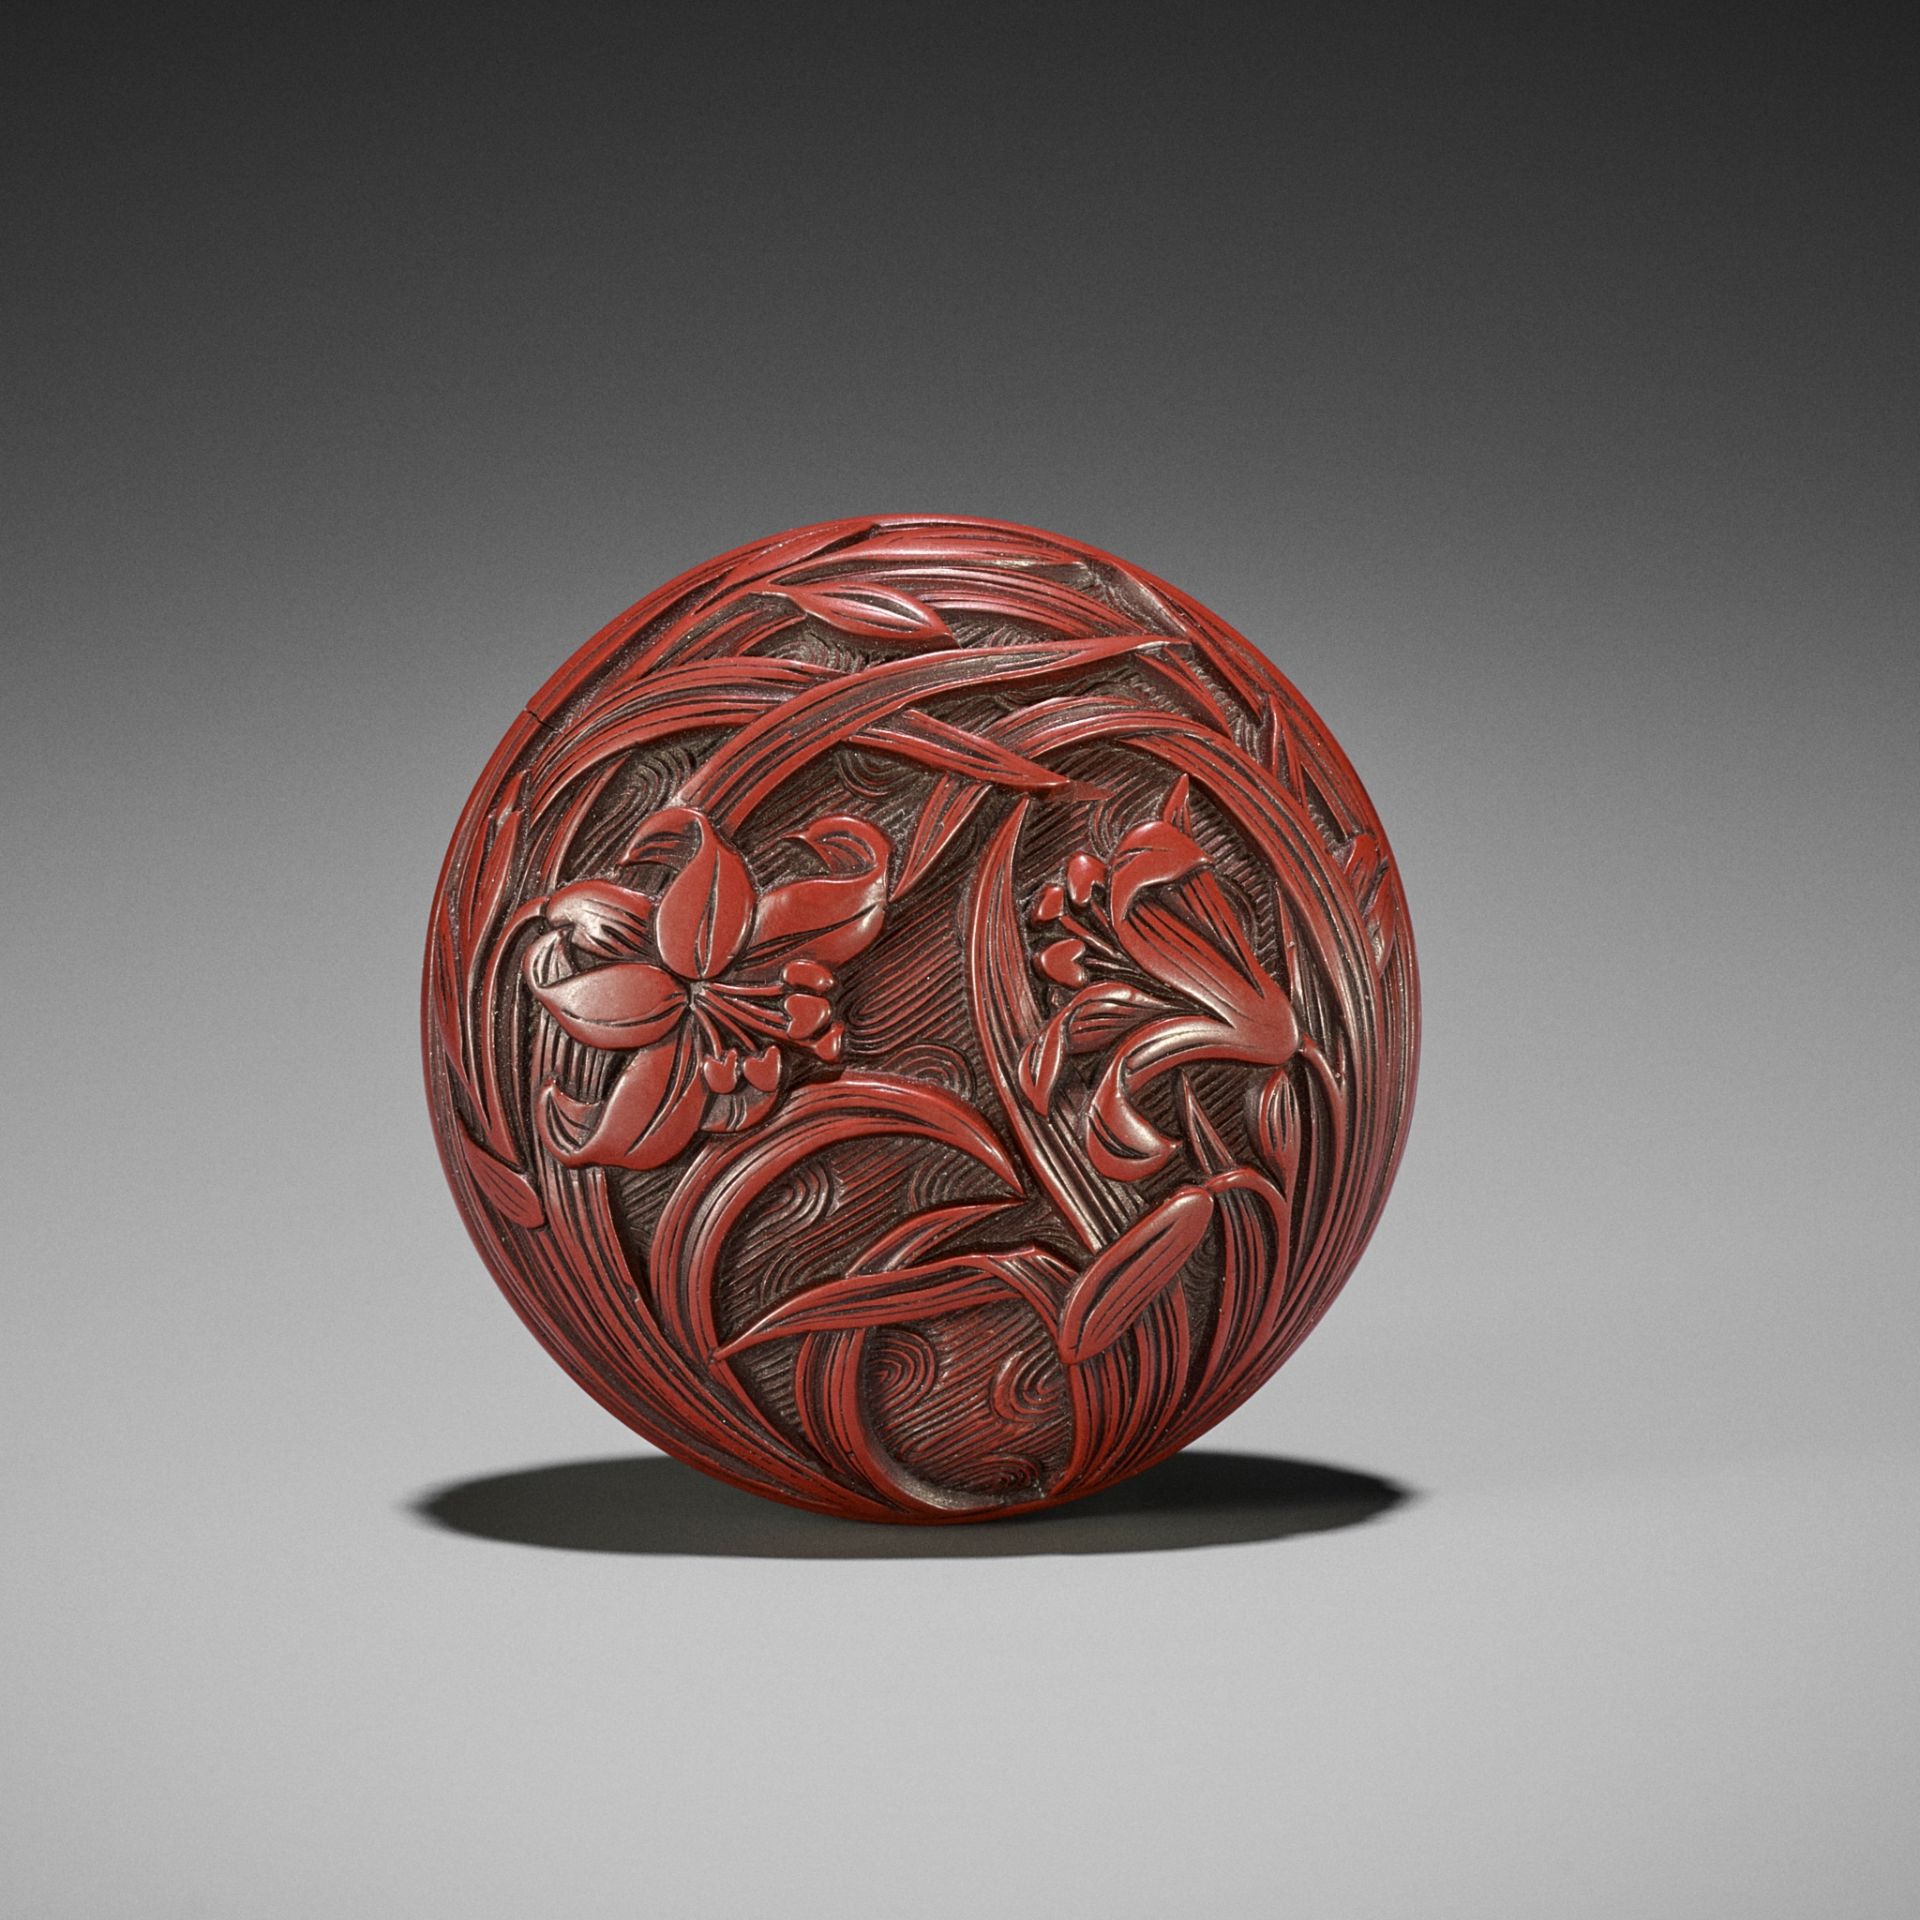 A FINE TSUISHU (CARVED RED LACQUER) MANJU NETSUKE WITH LILIES